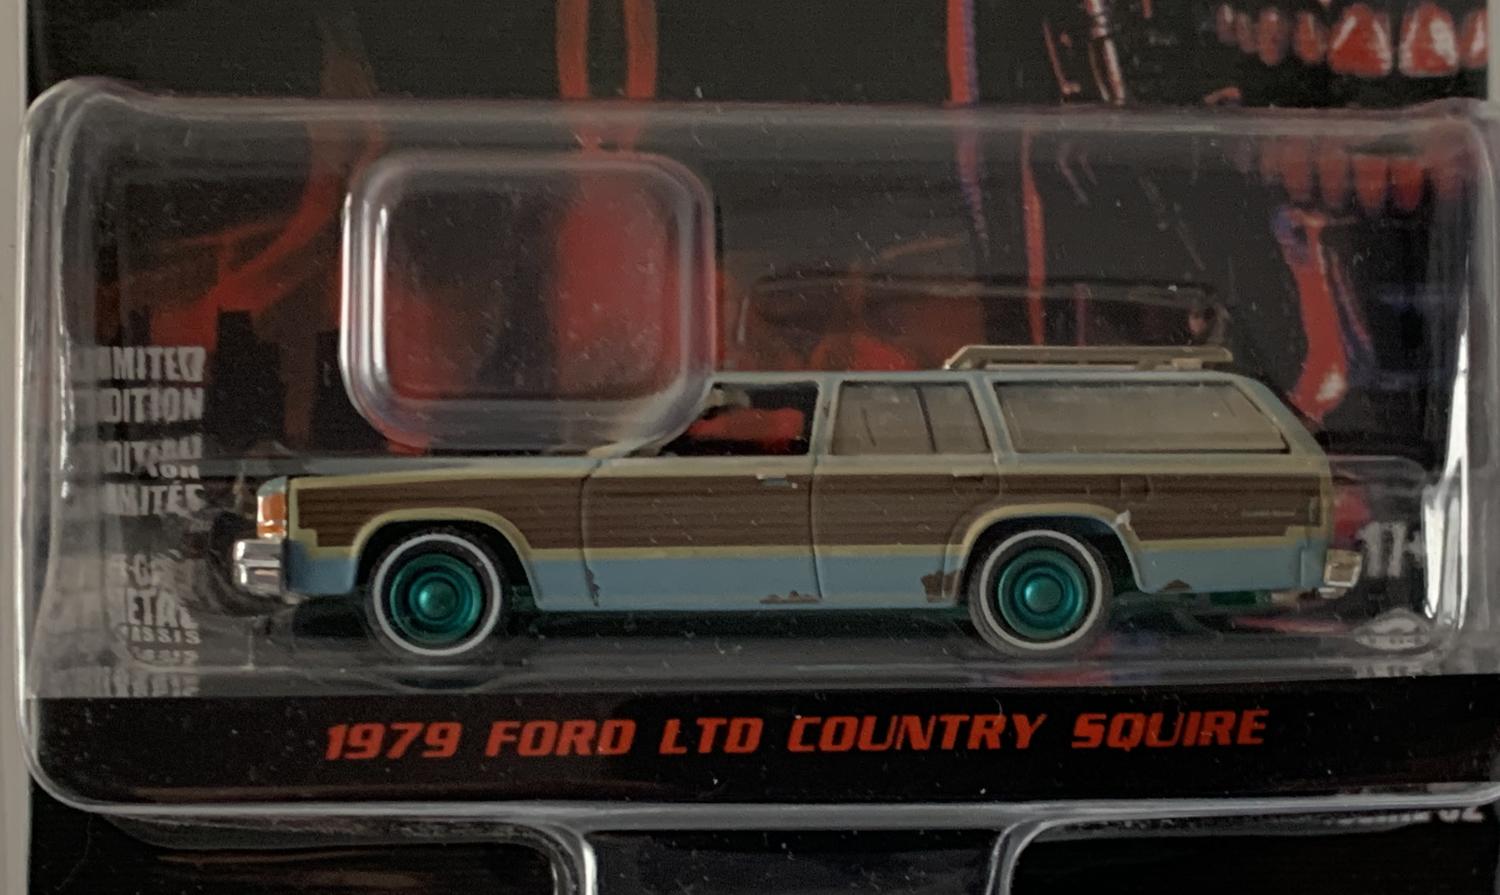 Terminator 2 Judgment Day 1979 Ford Ltd Country Squire 1:64 scale model from Greenlight, limited edition model, with GREEN WHEELS